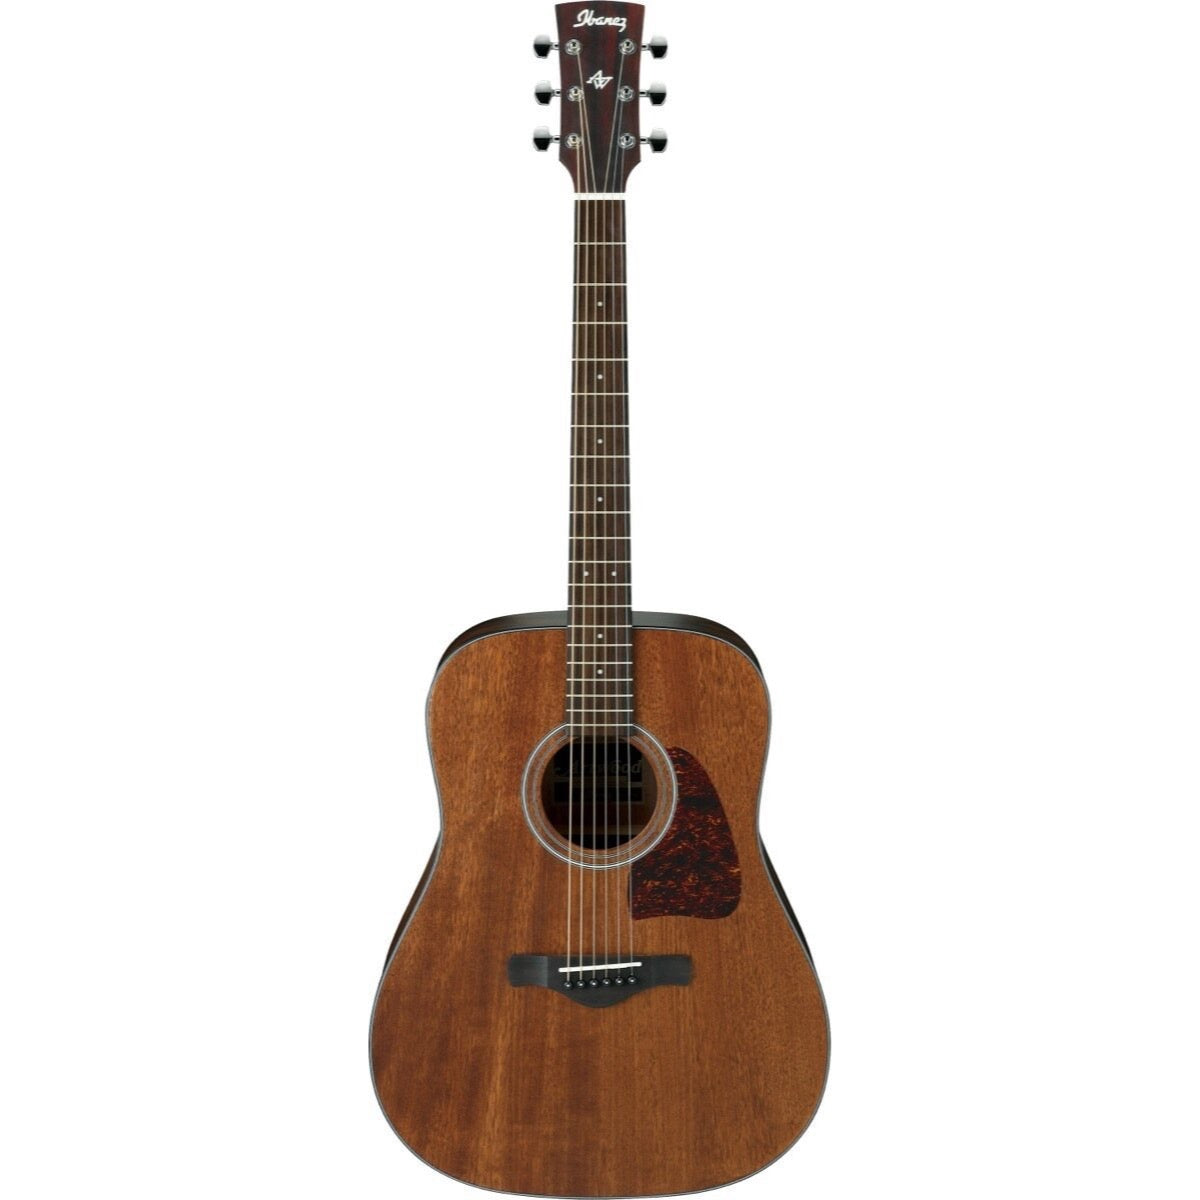 Ibanez AW54 Artwood Acoustic Guitar, Open Pore Natural